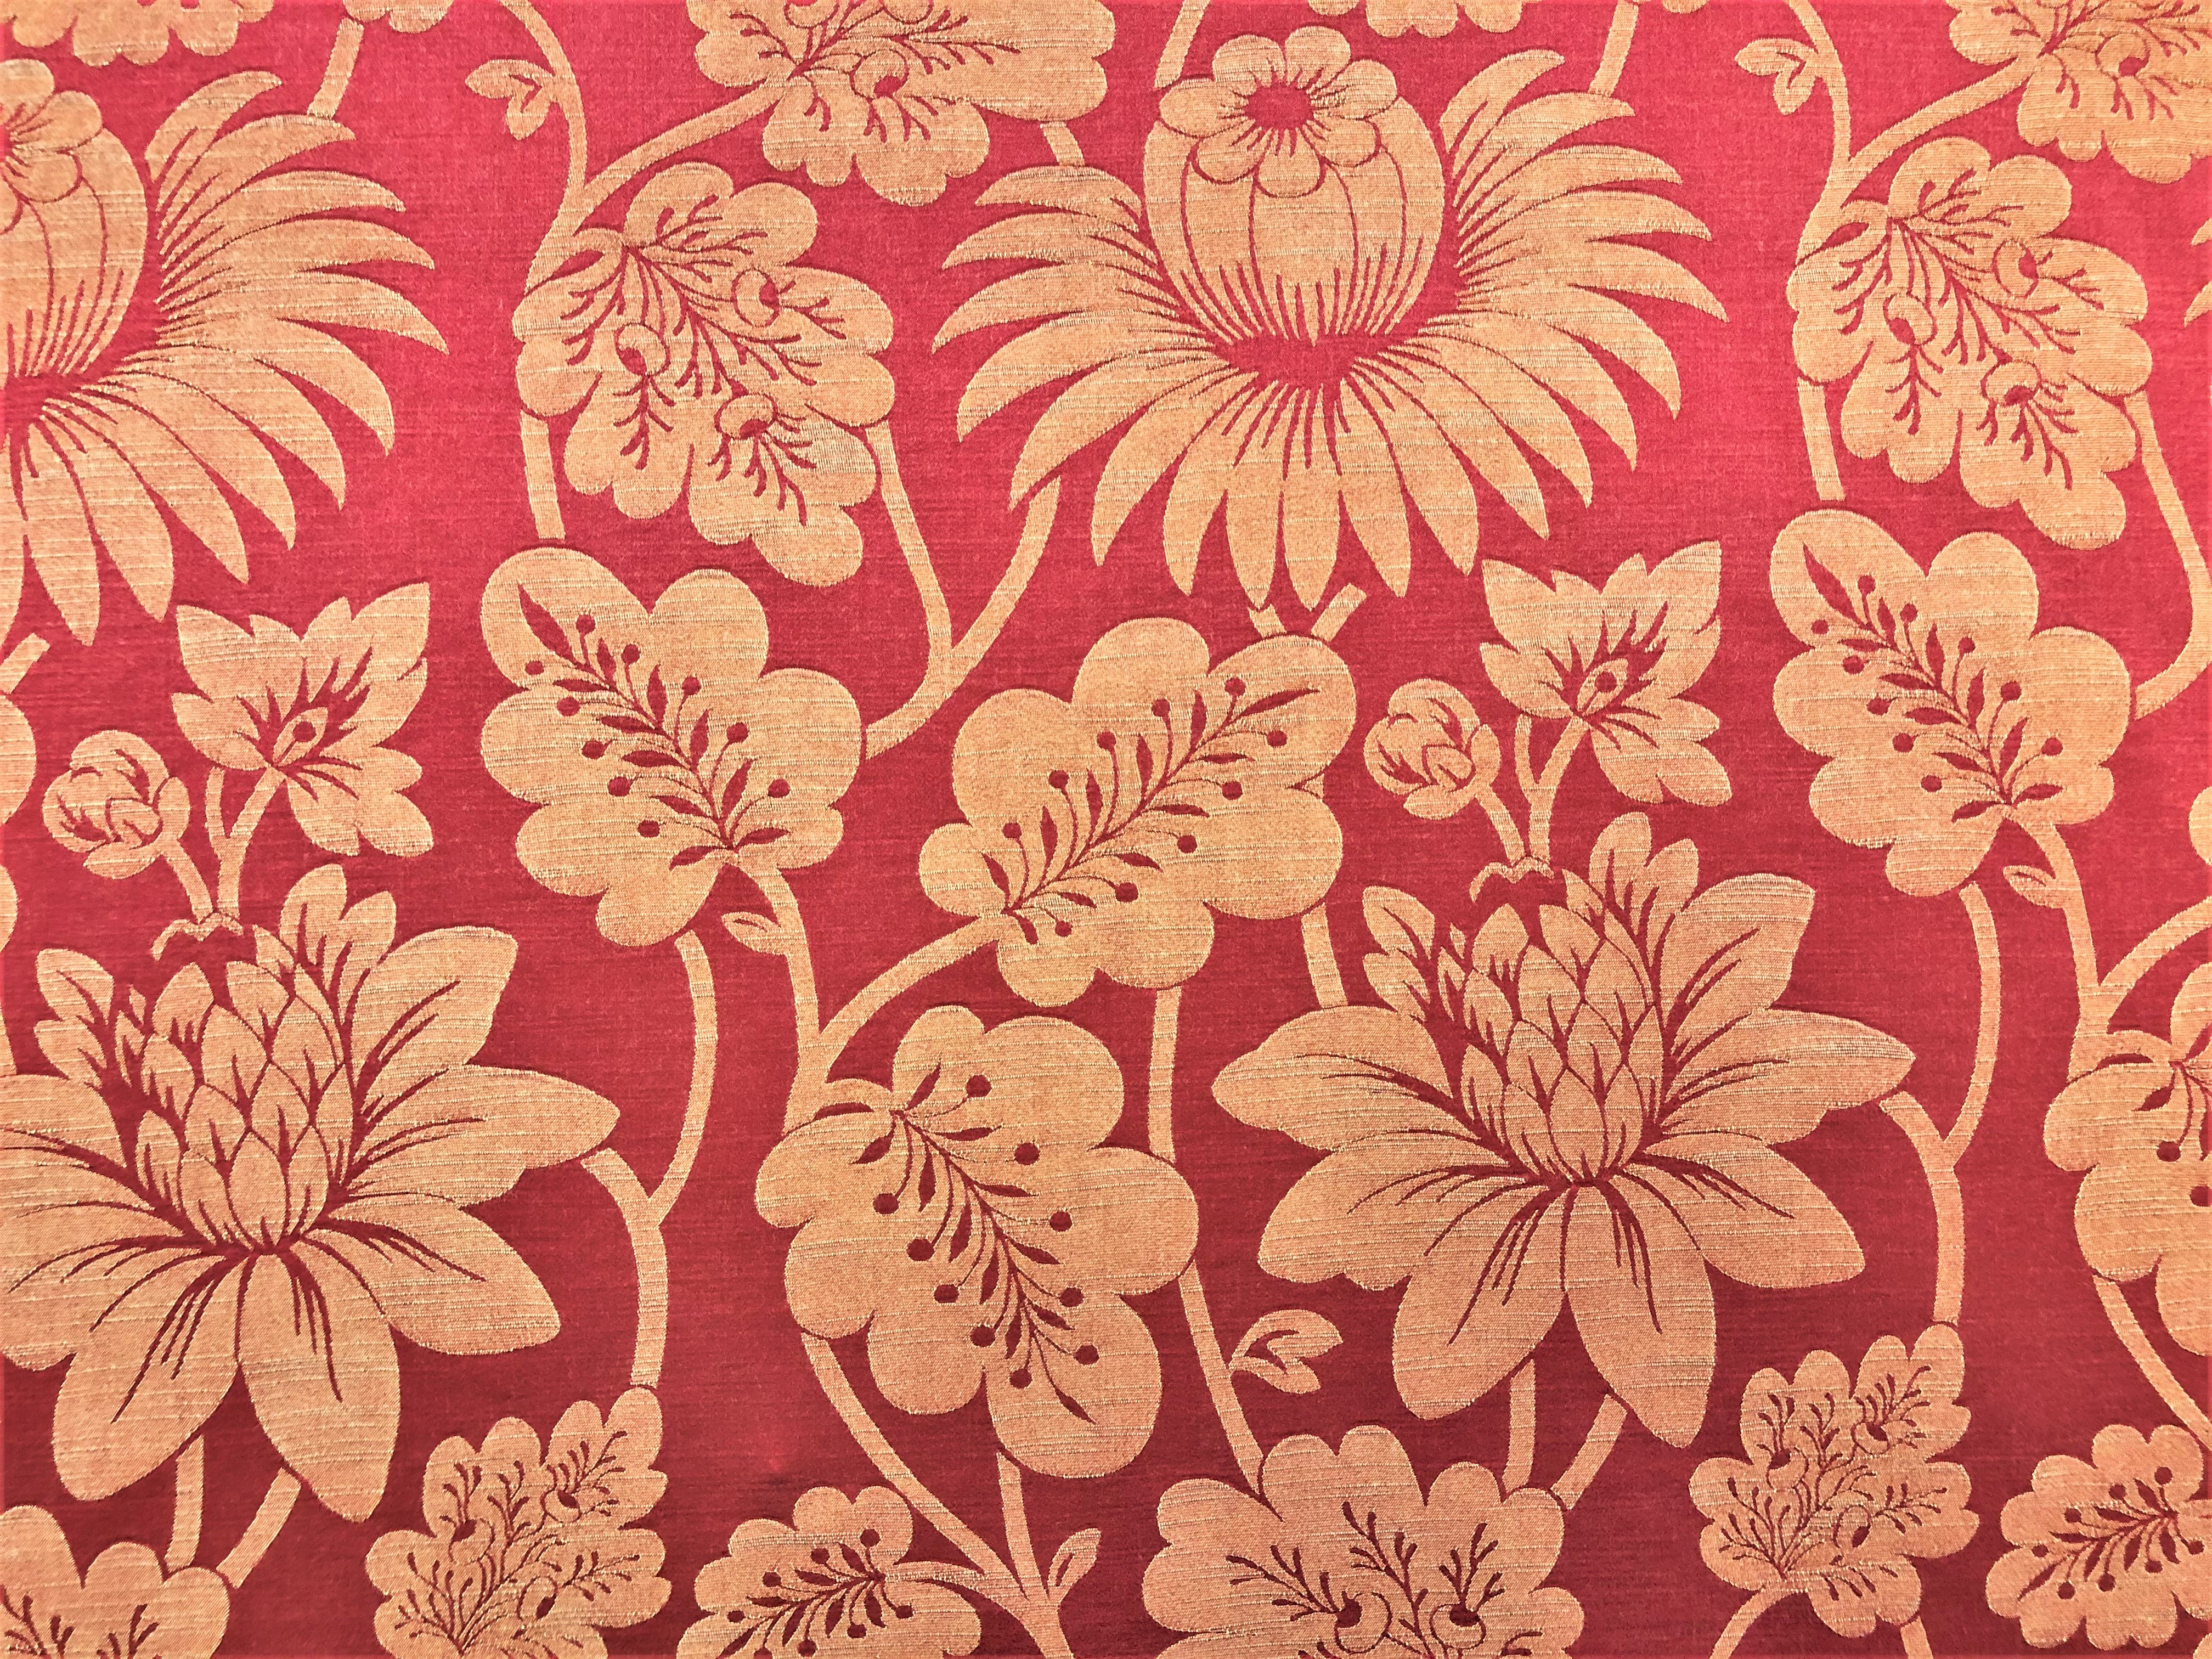 Lee Jofa Hanbury Weave Red Gold Beige Contemporary Floral Jacobean  Botanical Damask Upholstery Drapery Fabric